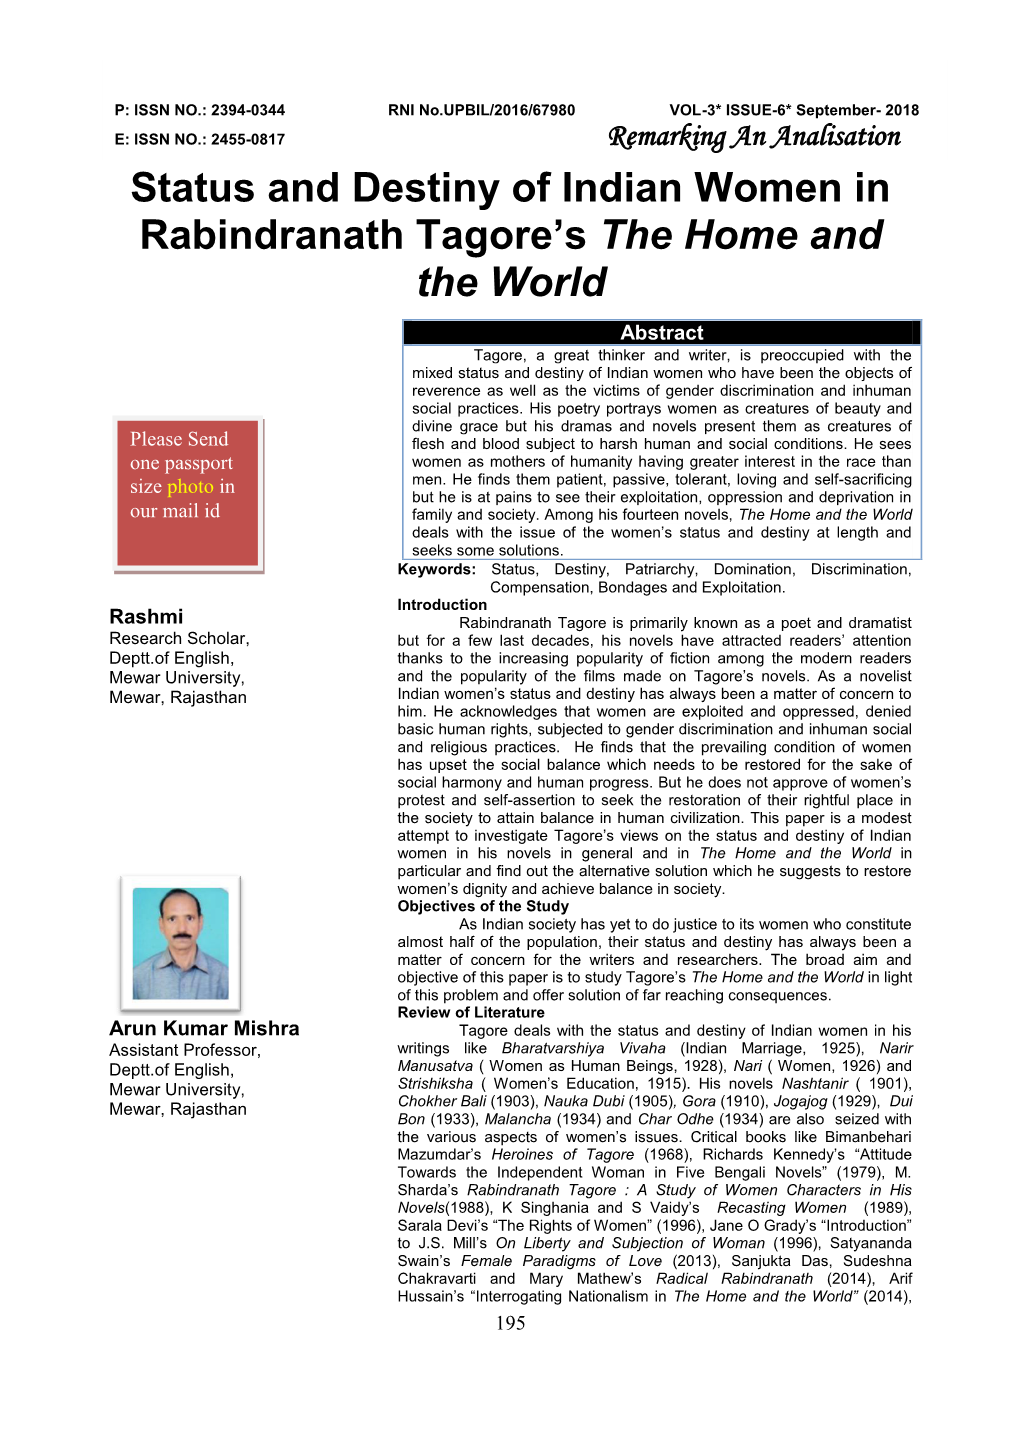 Status and Destiny of Indian Women in Rabindranath Tagore's the Home and the World